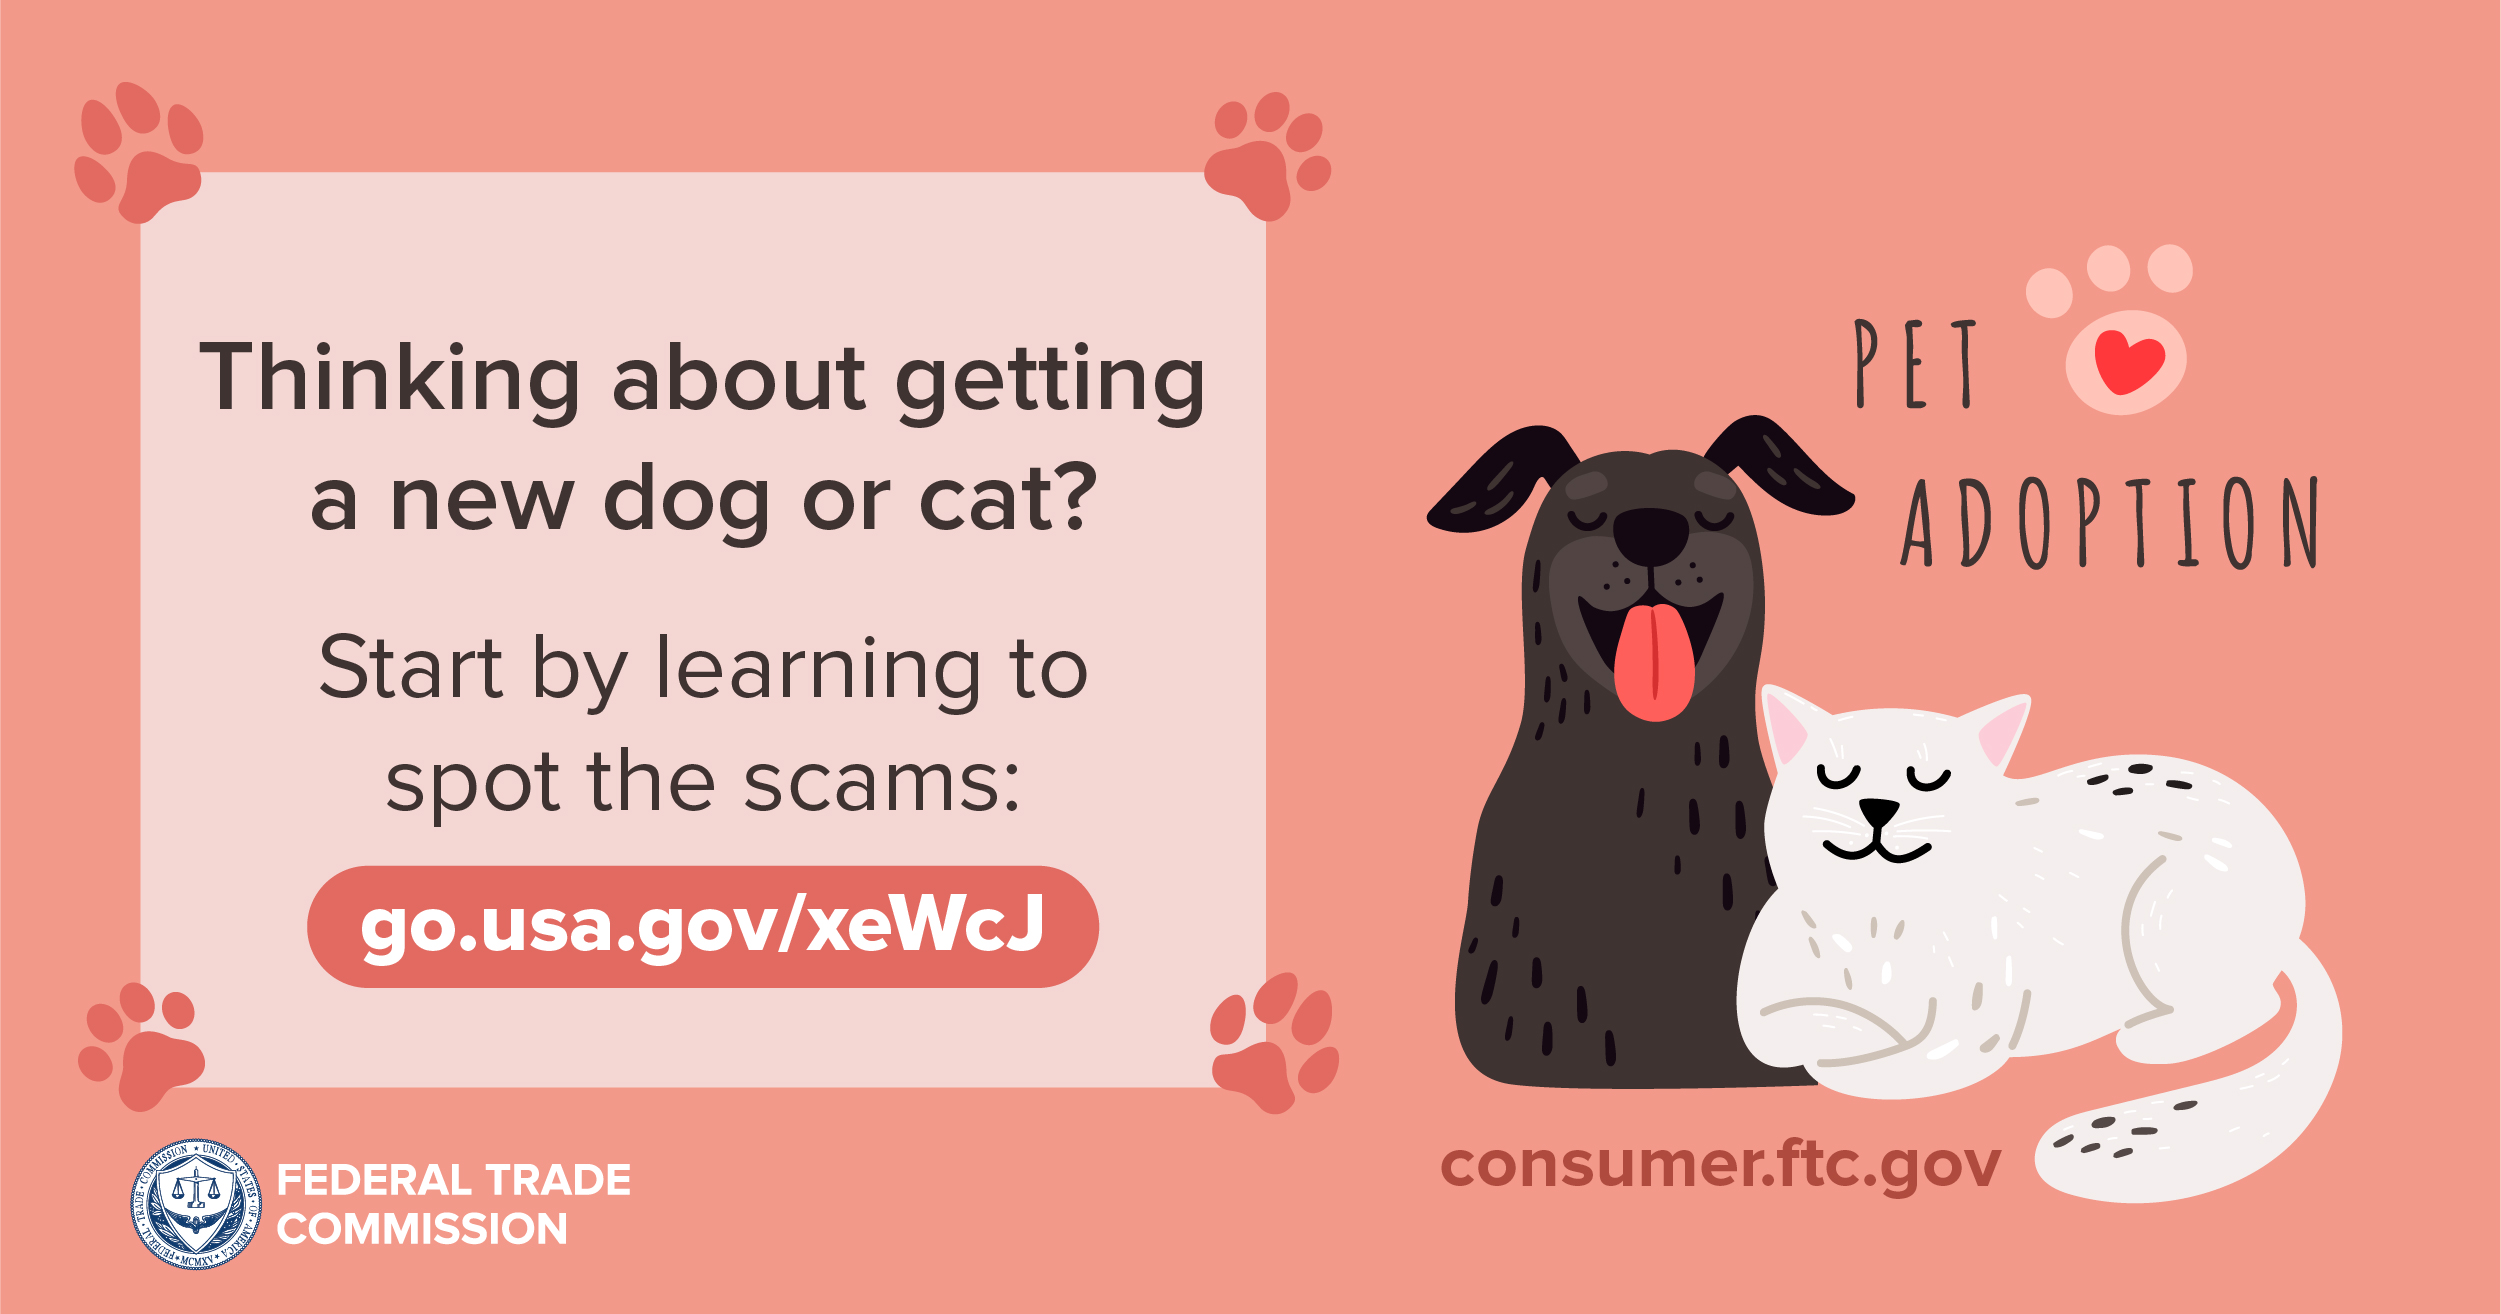 Thinking about getting a new dog or cat? Start by learning to spot the scams. Consumer.ftc.gov